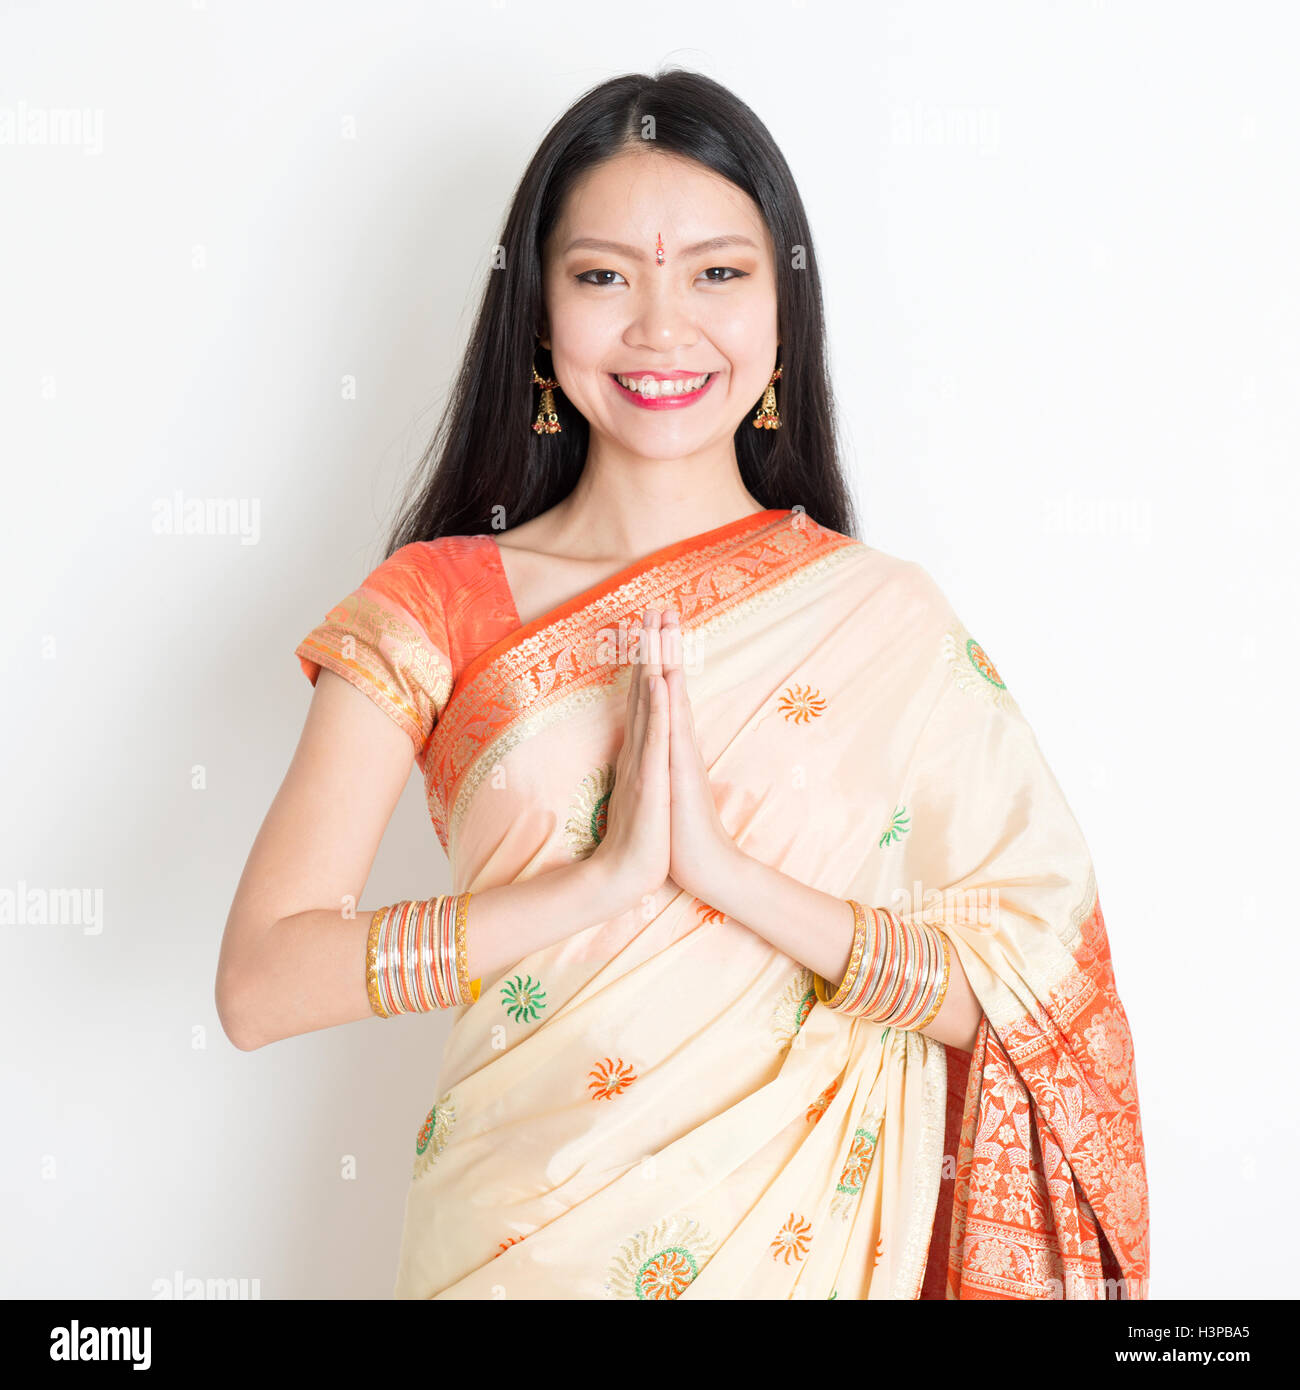 Portrait Of Mixed Race Indian Chinese Girl With Traditional Sari Dress